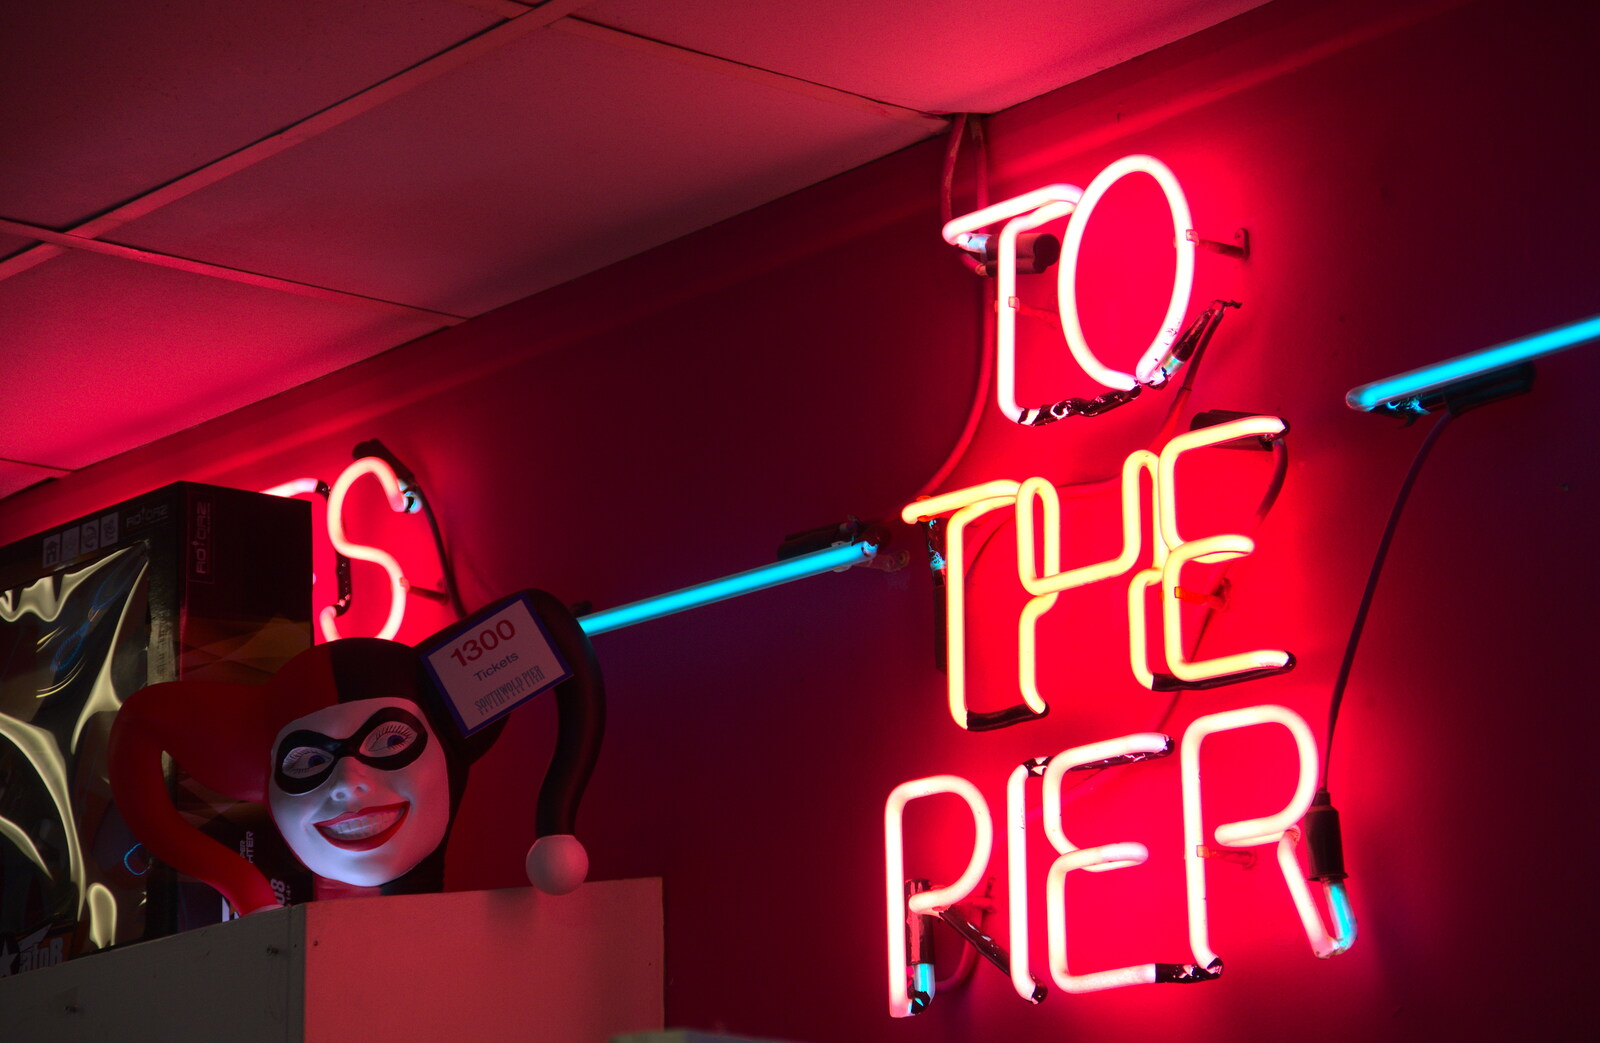 The 'to the pier' red neon sign from A Southwold Car Picnic, Southwold, Suffolk - 11th March 2018